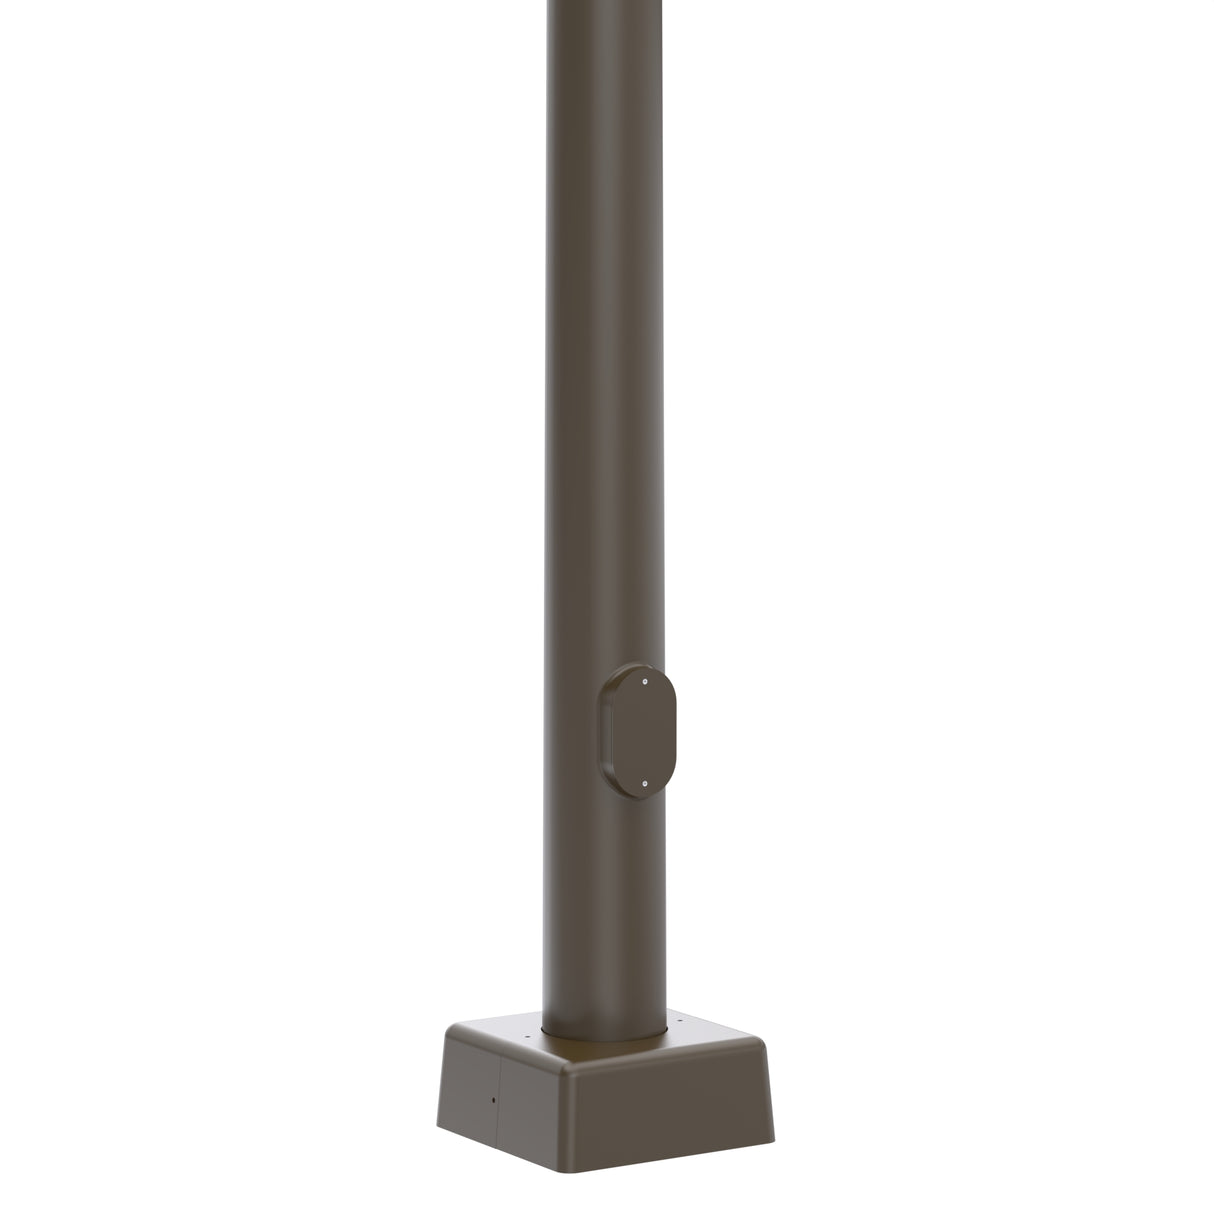 45' Tall x 10" Base OD x 3.7" Top OD x 7ga Thick, Round Tapered Steel, Anchor Base Light Pole